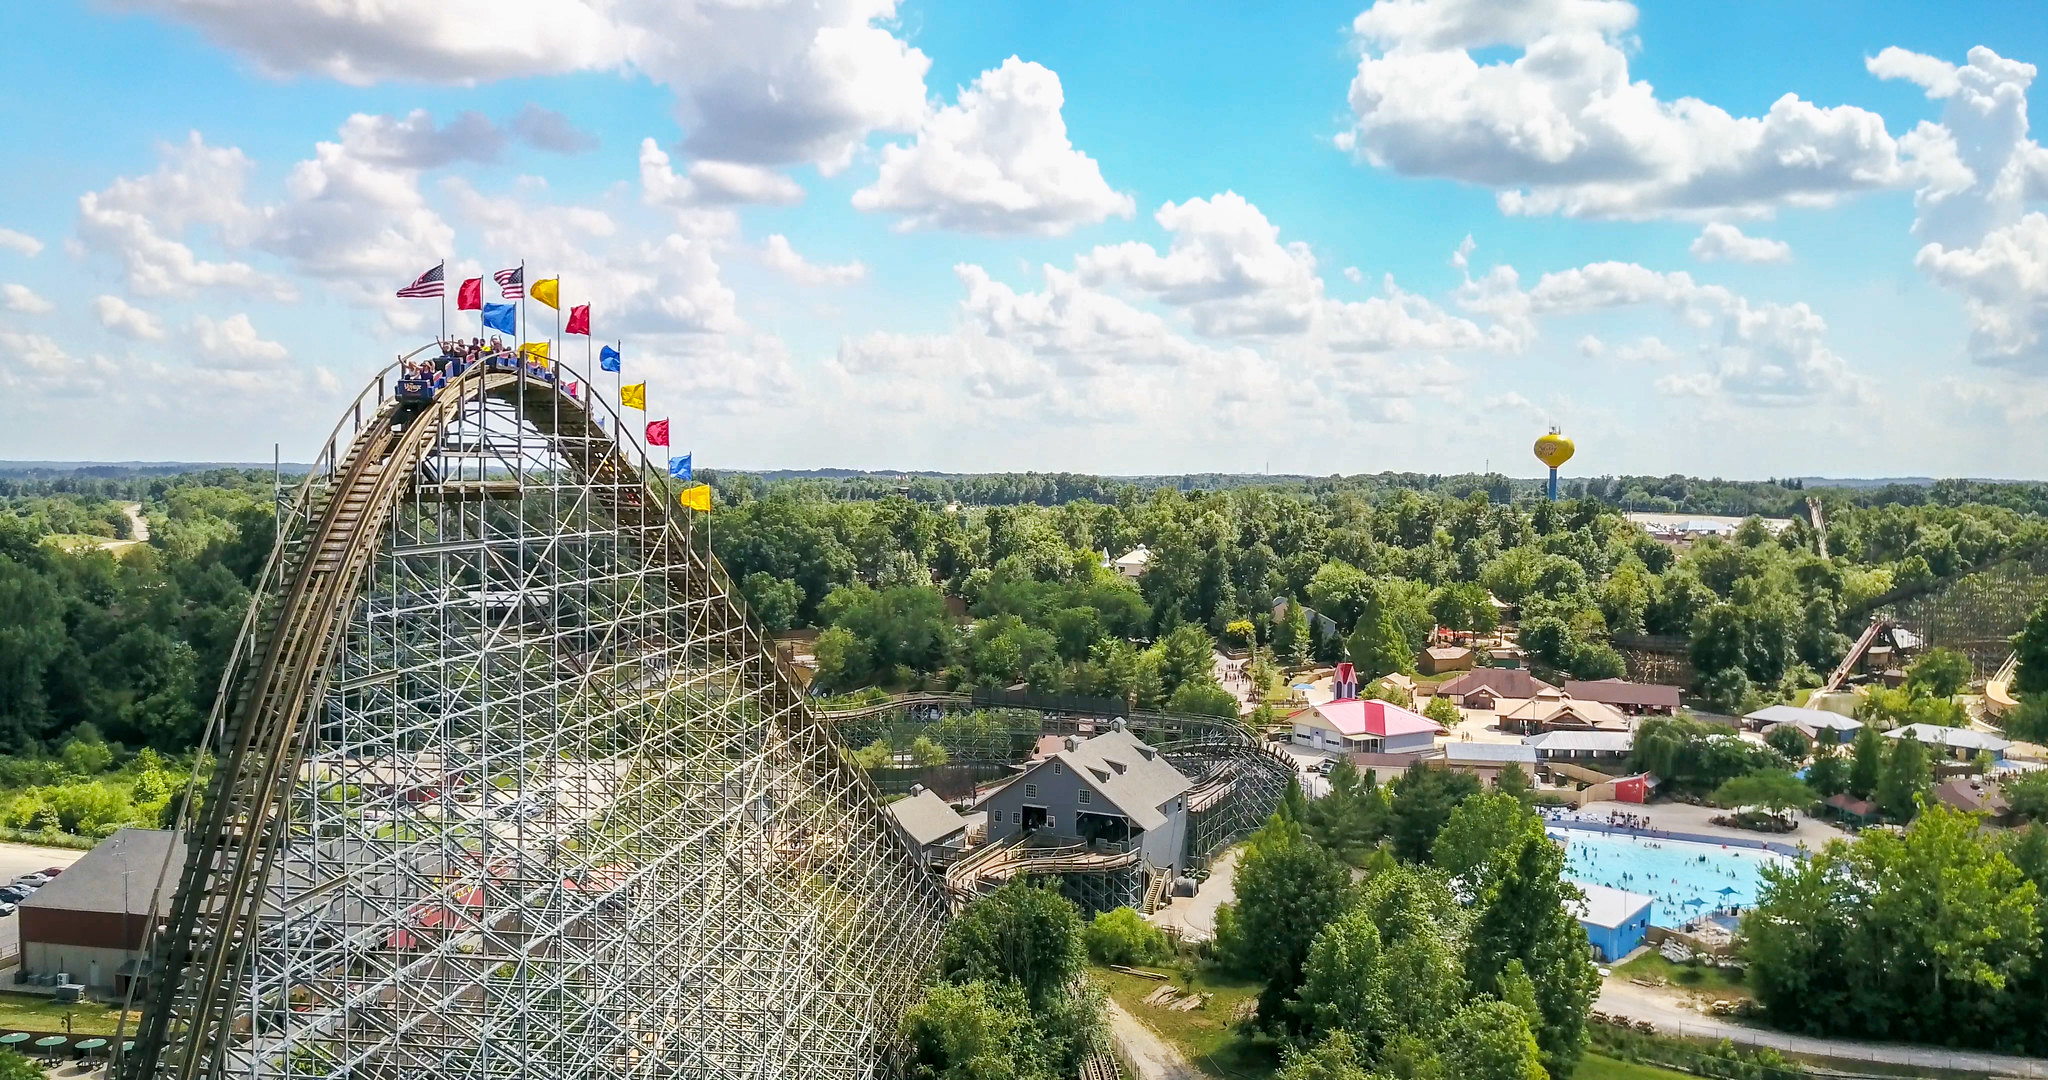 Visitors are thrilled as the Voyage Wooden Roller Coaster in Holiday World & Splashin' Safari in Santa Claus, Indiana, one of the best roller coaster parks in the US, as the ride prepares to plunge